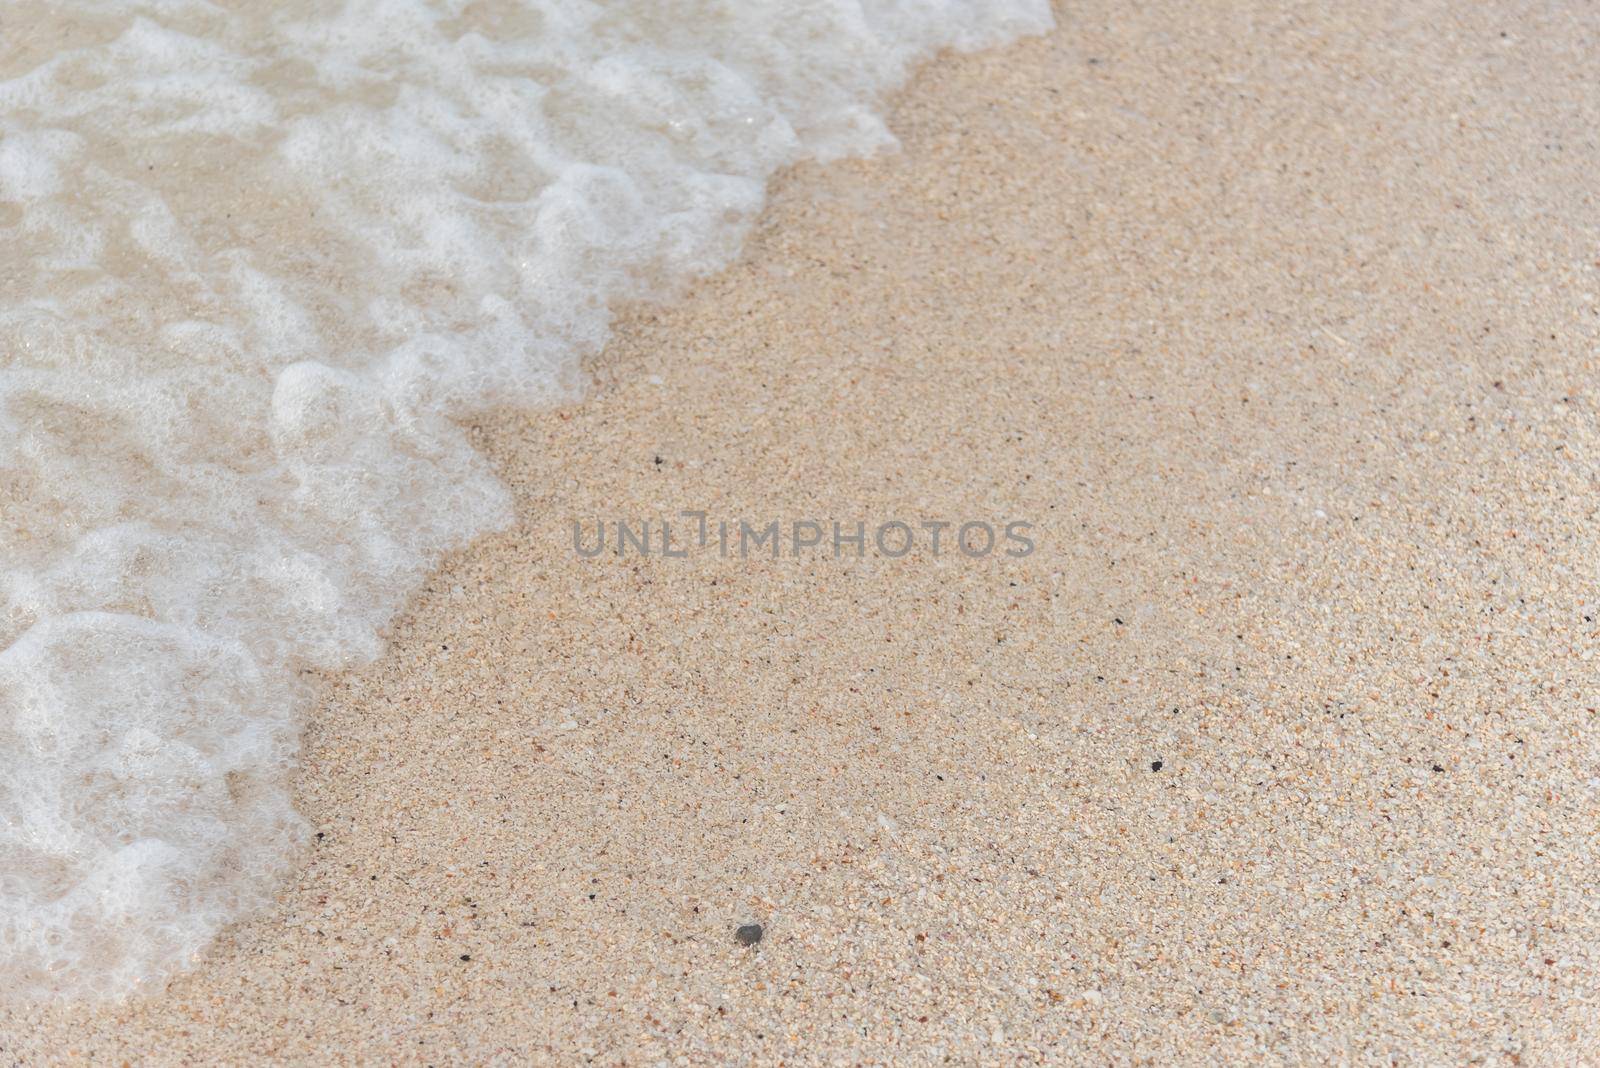 Soft wave of the sea on the sandy beach